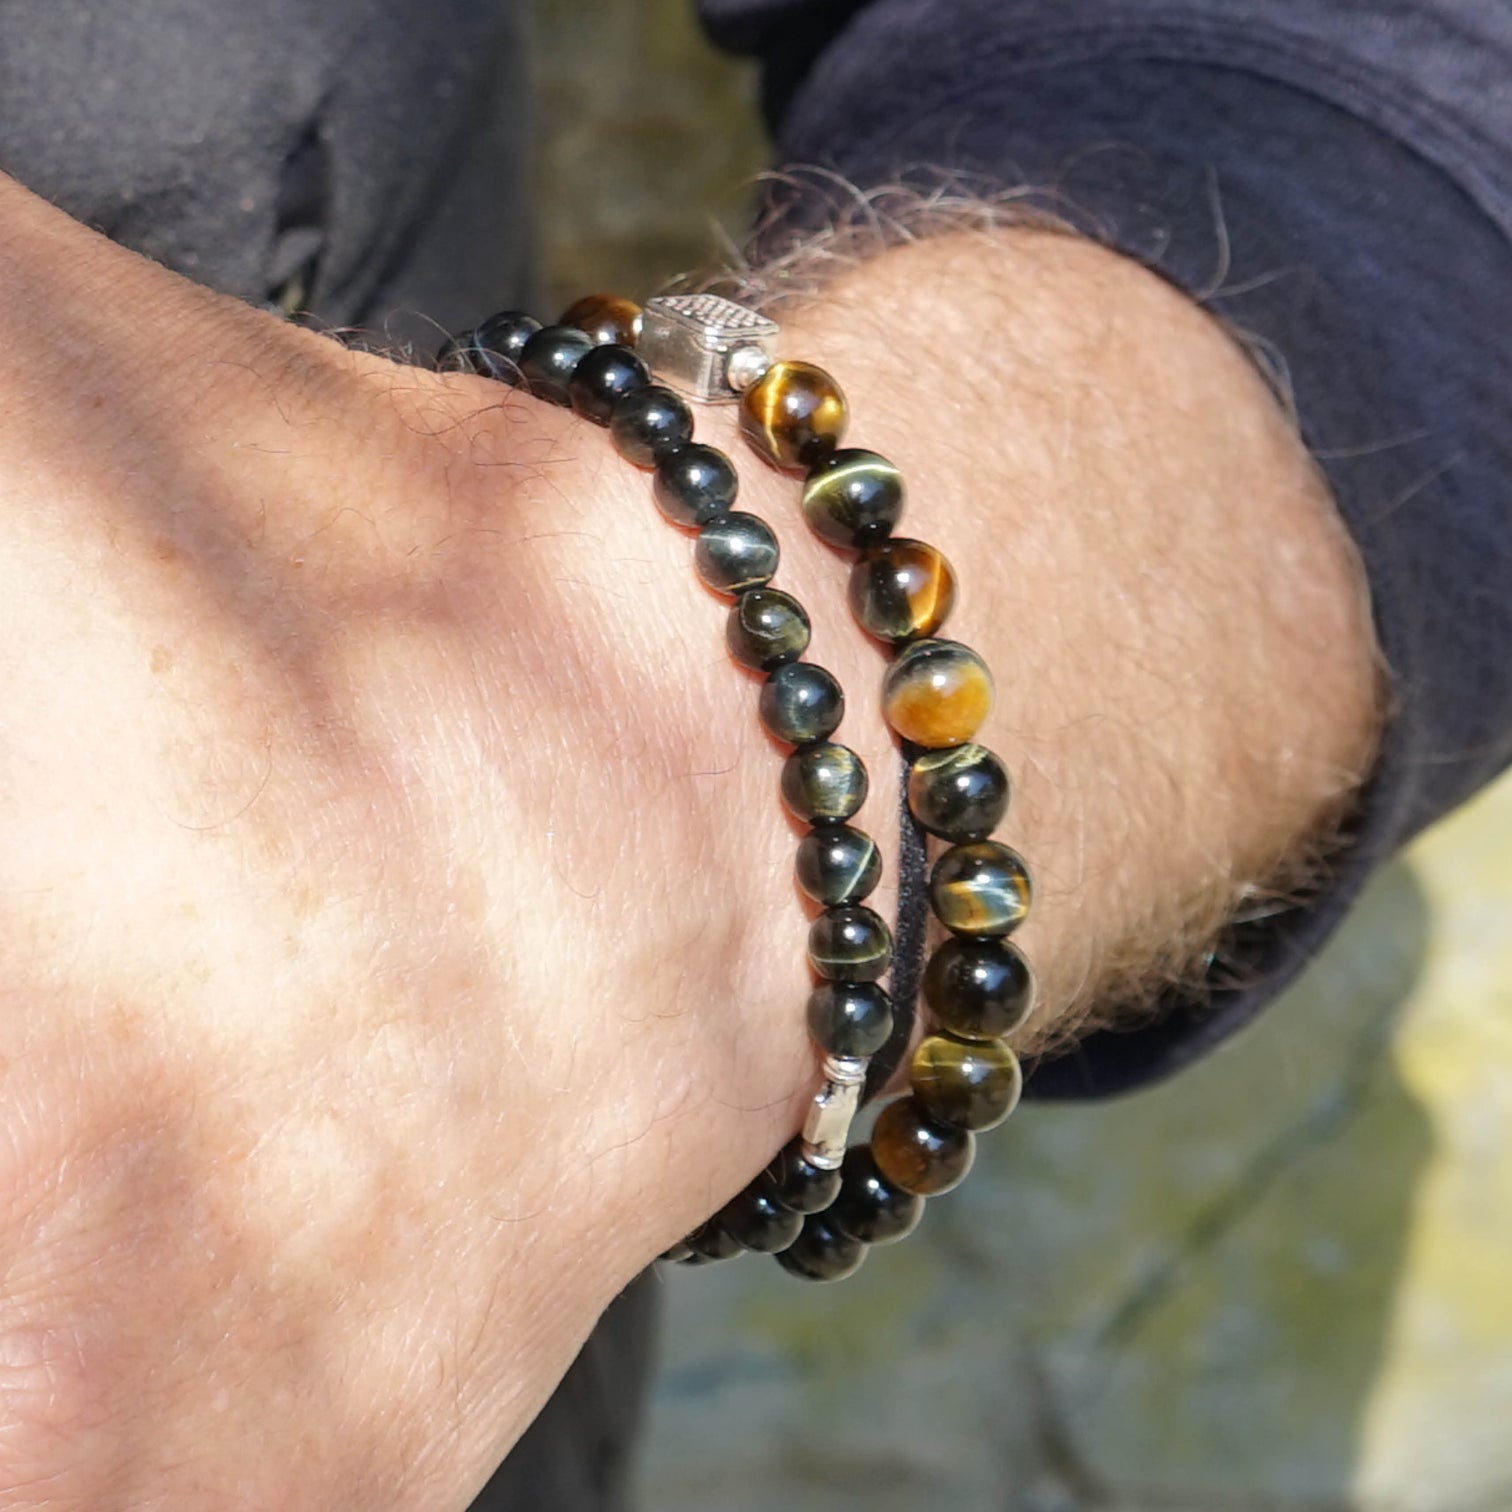 Male Model wearing the Liam and the Chey Men Beaded Bracelet made with Falcon Eye called as well Blue Tiger Eye and Sterling Silver. 